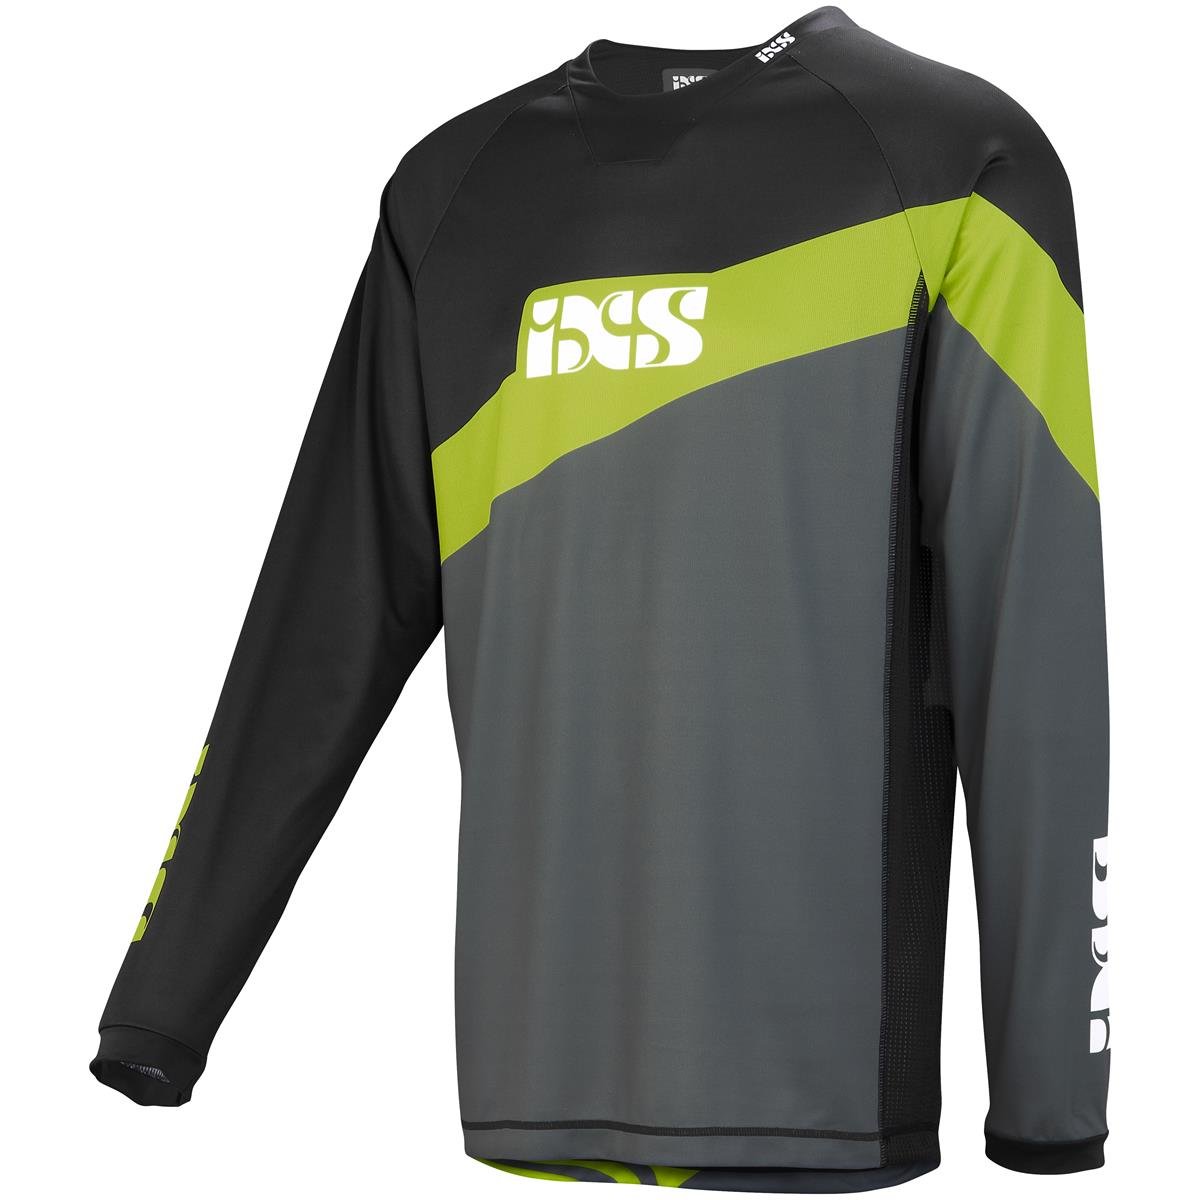 IXS Maillot VTT Race 7.1 Graphite/Lime - Worldcup Edition